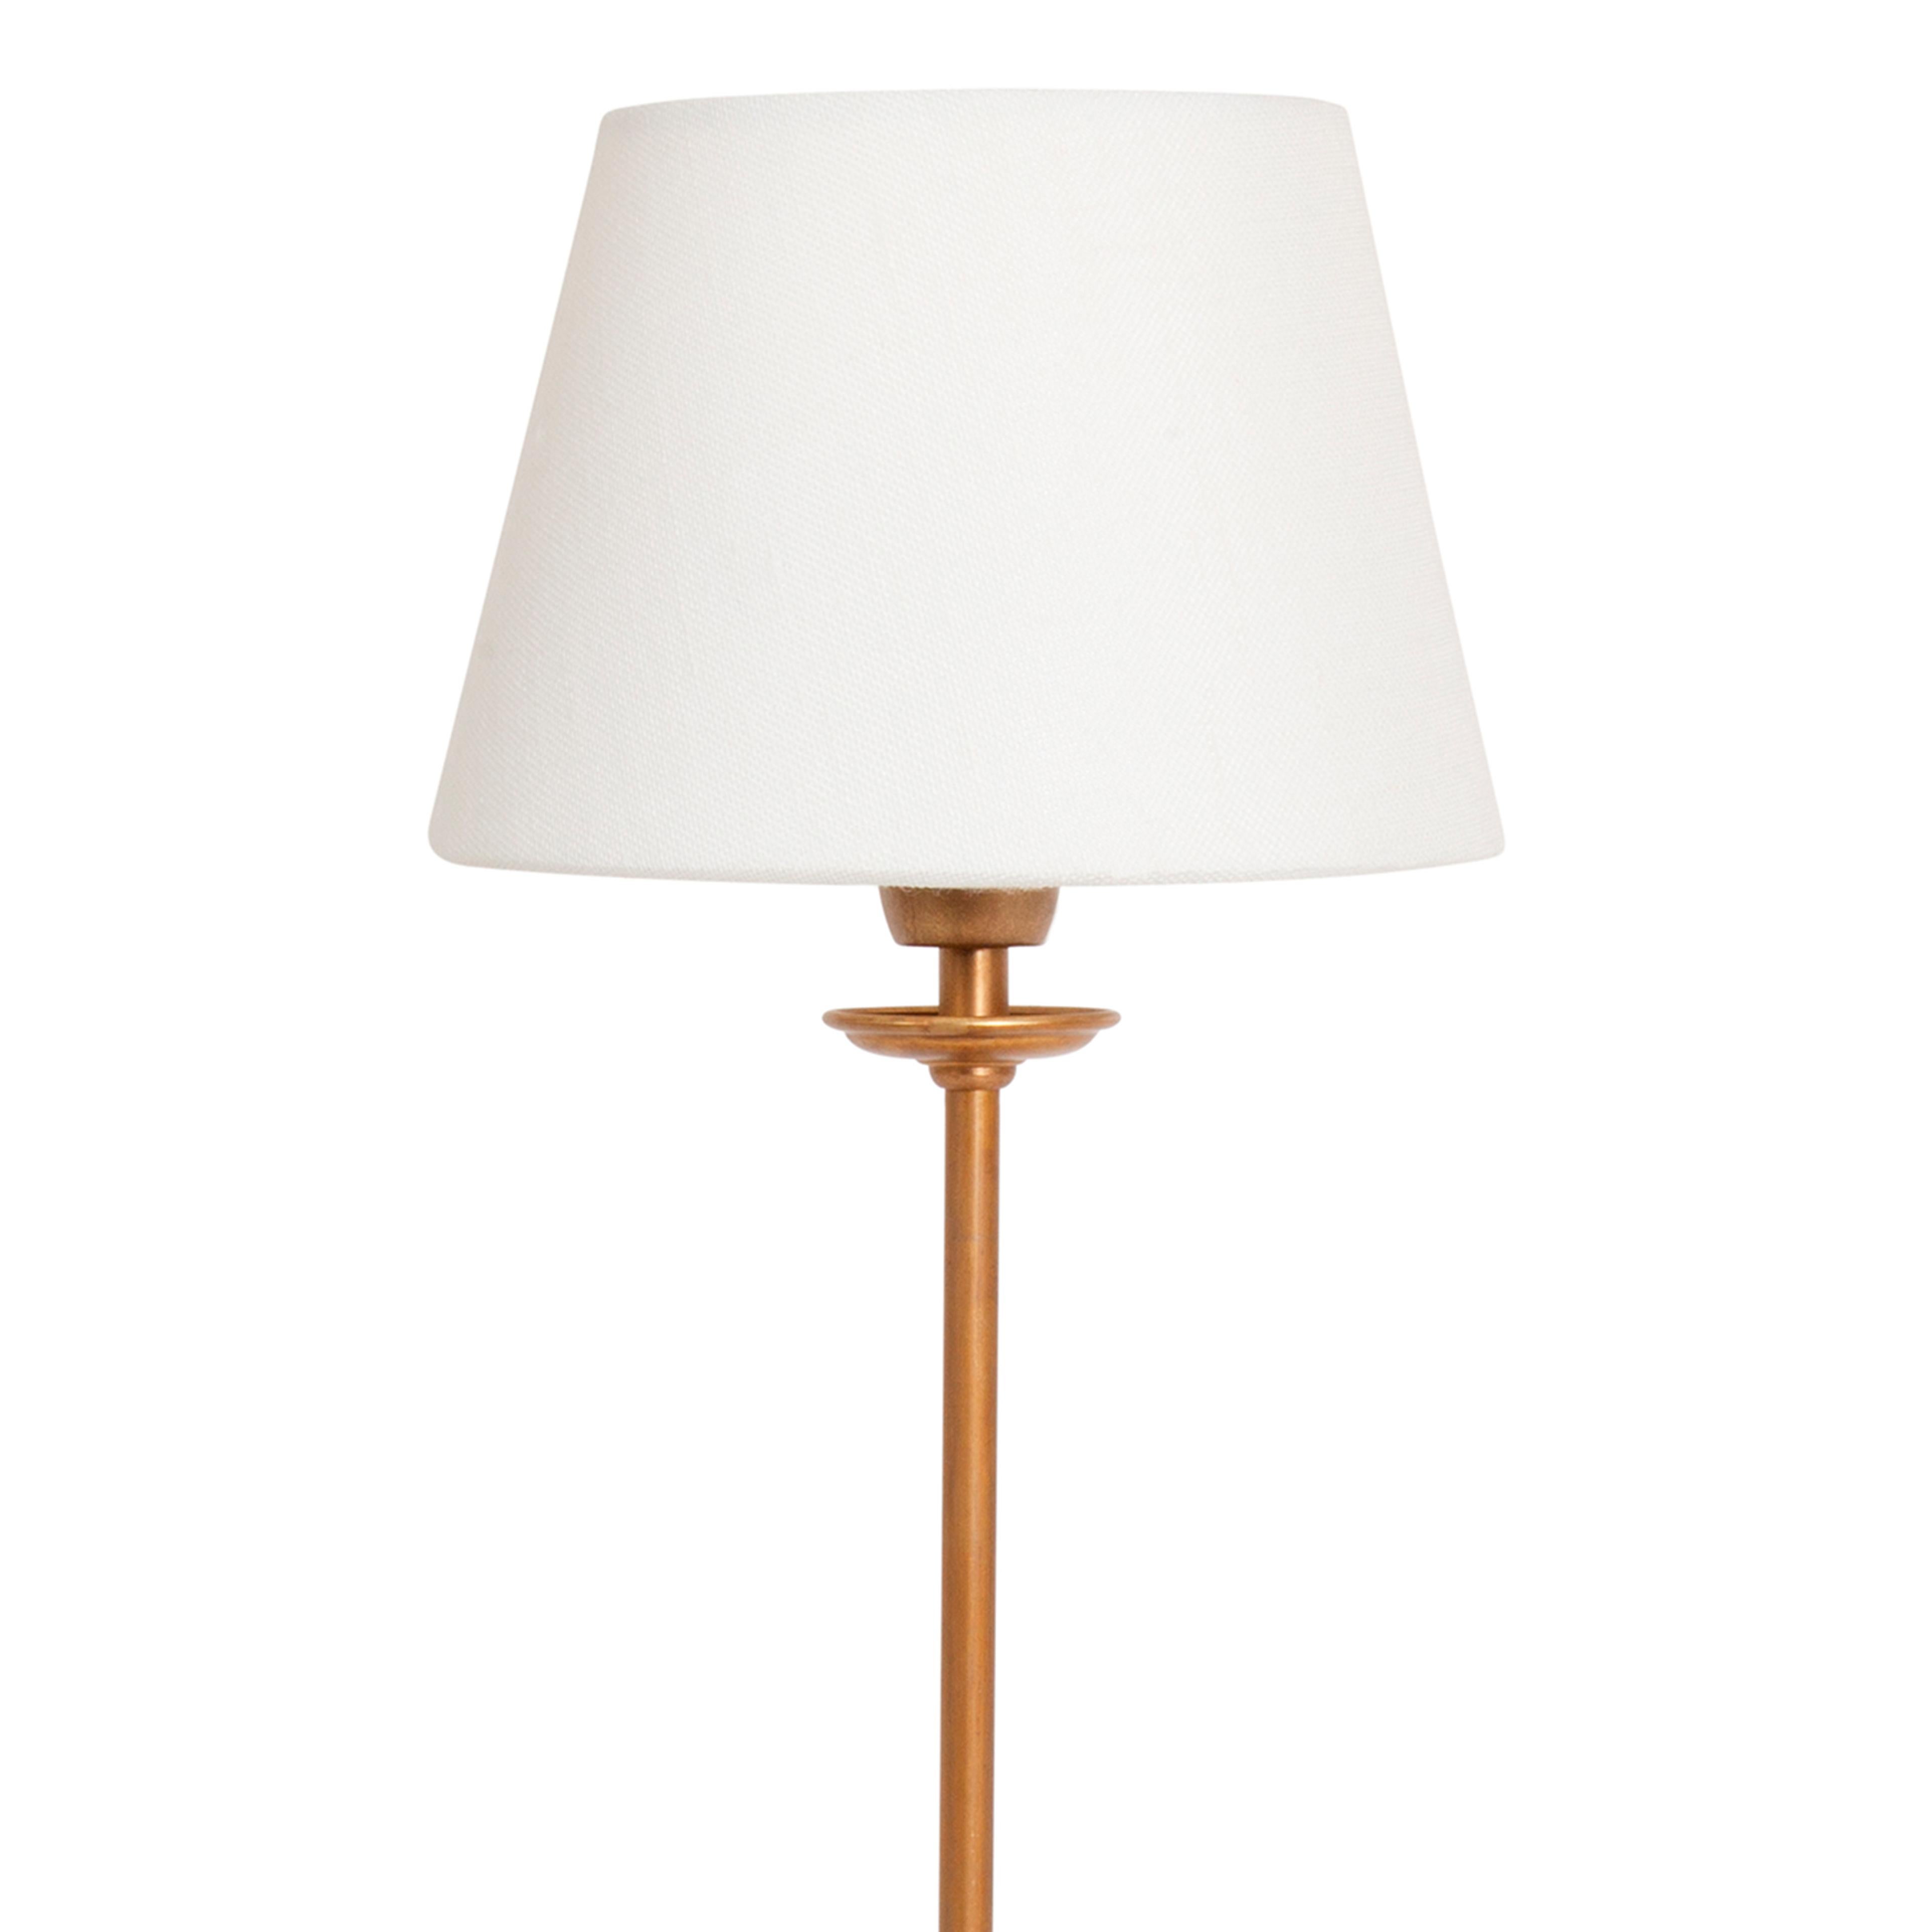 Konsthantverk Uno small brass table lamp.

We usually call it the lamp of possibilities. You create your very own dream combination with the help of a lamp base and screen. The lamp base is available in two heights. Each in a couple of different